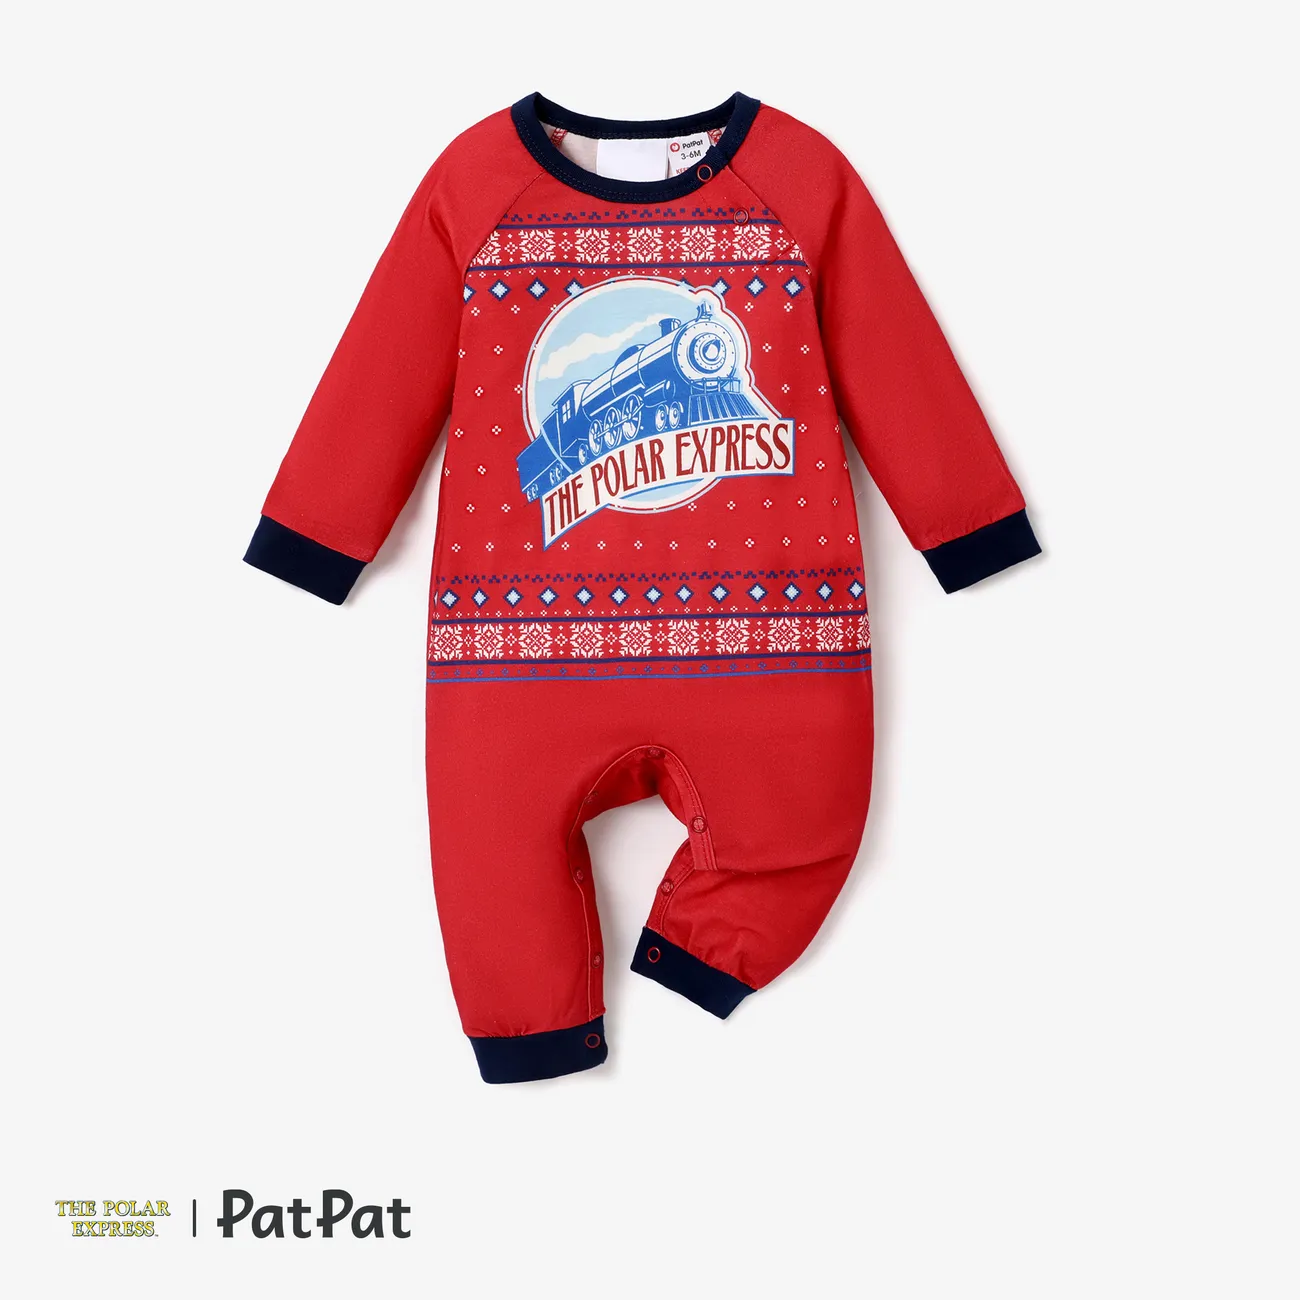 The Polar Express Christmas Family Matching Big Graphic Allover Pajamas (Flame Resistant) Multi-color big image 1